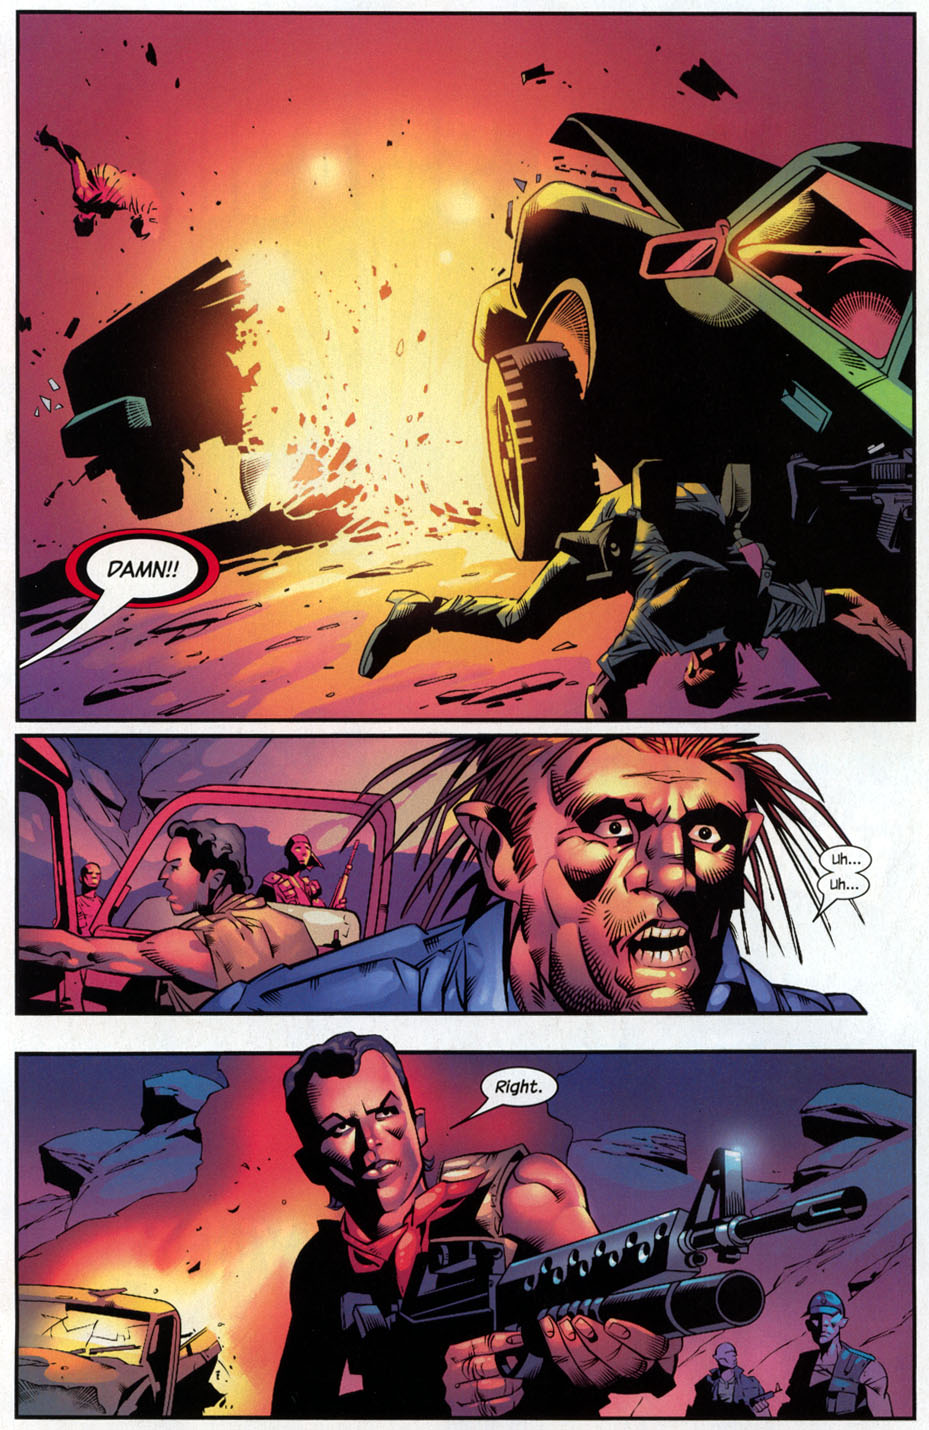 The Punisher (2001) issue 30 - Streets of Laredo #03 - Page 16